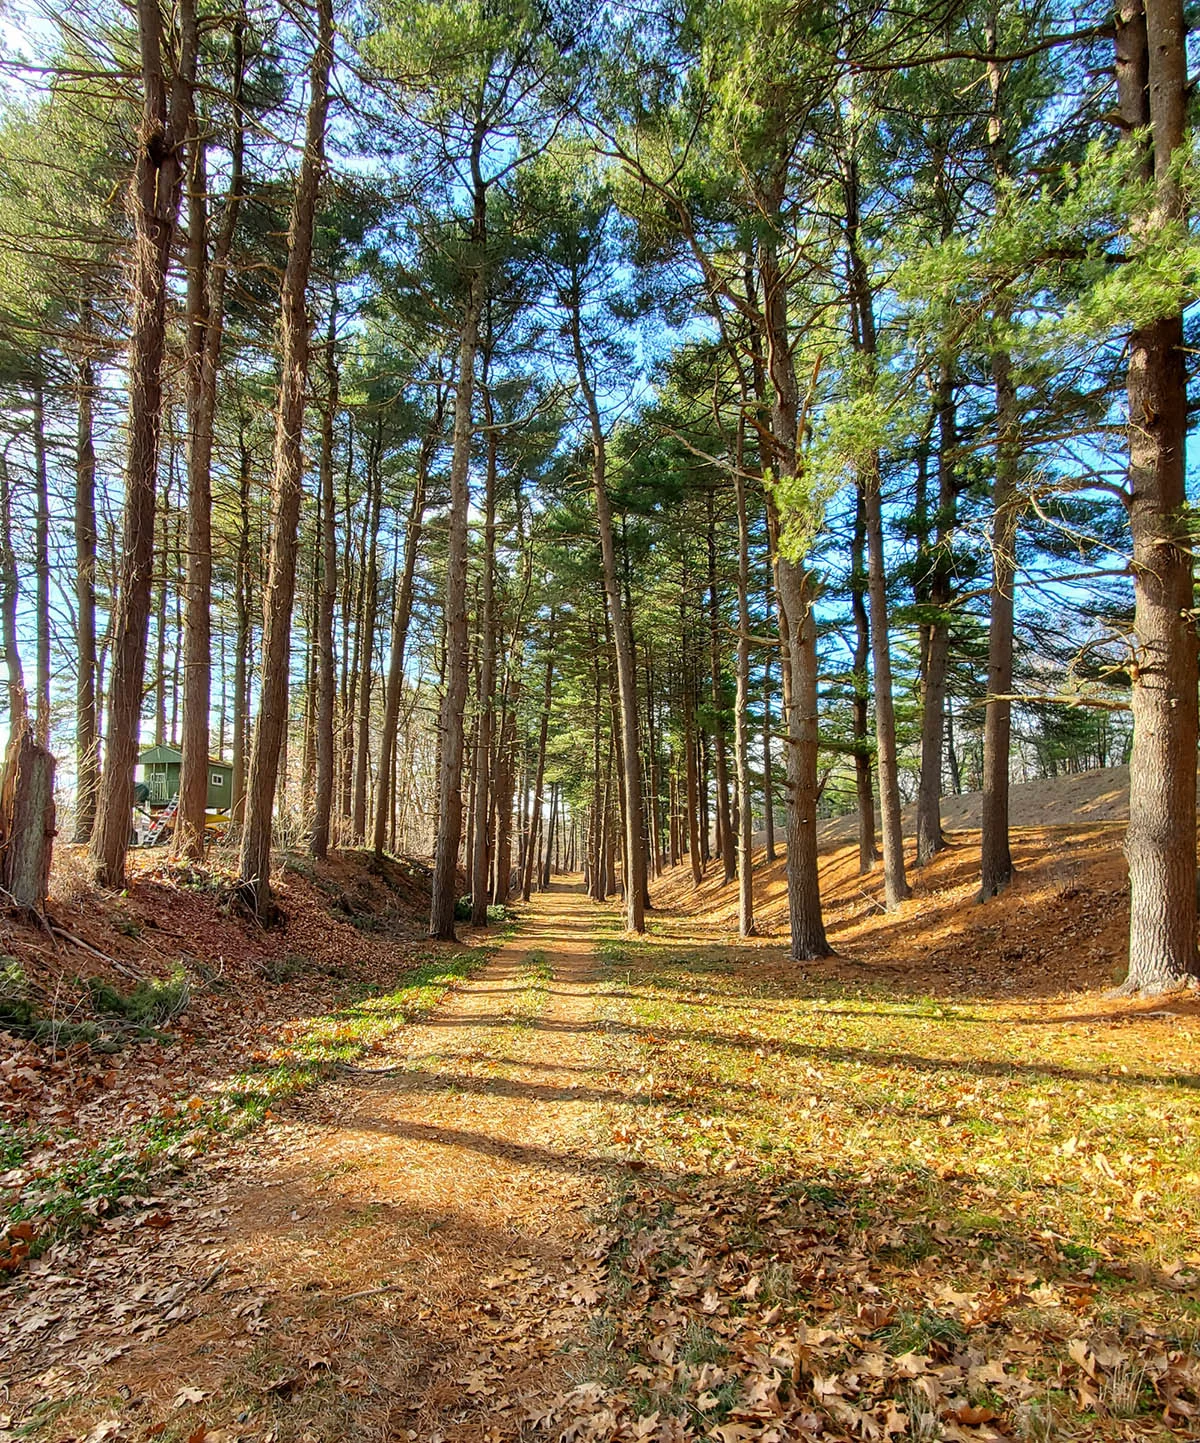 Photo of the Weston Aqueduct trail - dirt trail surrounded by pine trees